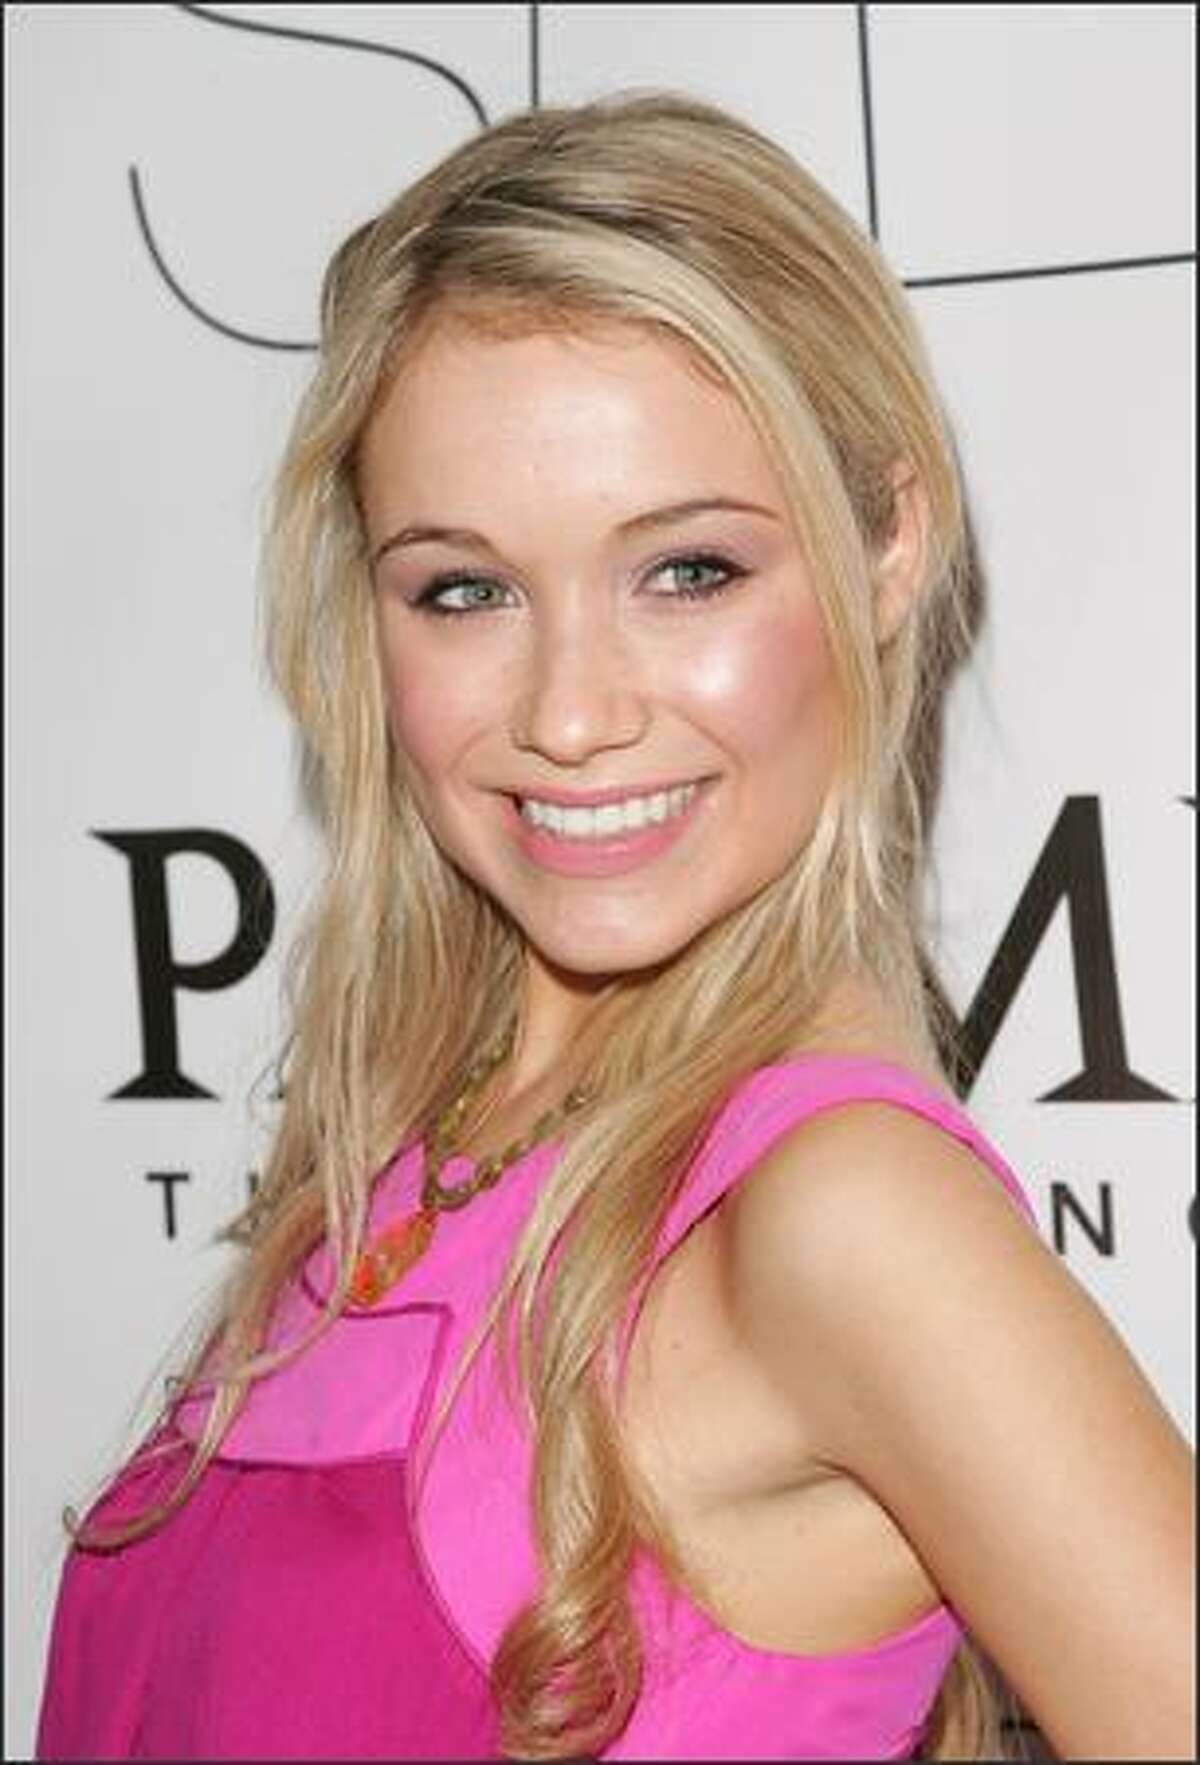 Actress Katrina Bowden attends Sony Pictures Classics' Premiere Of "Sleuth" at the Paris Theatre on October 2, 2007 in New York City.